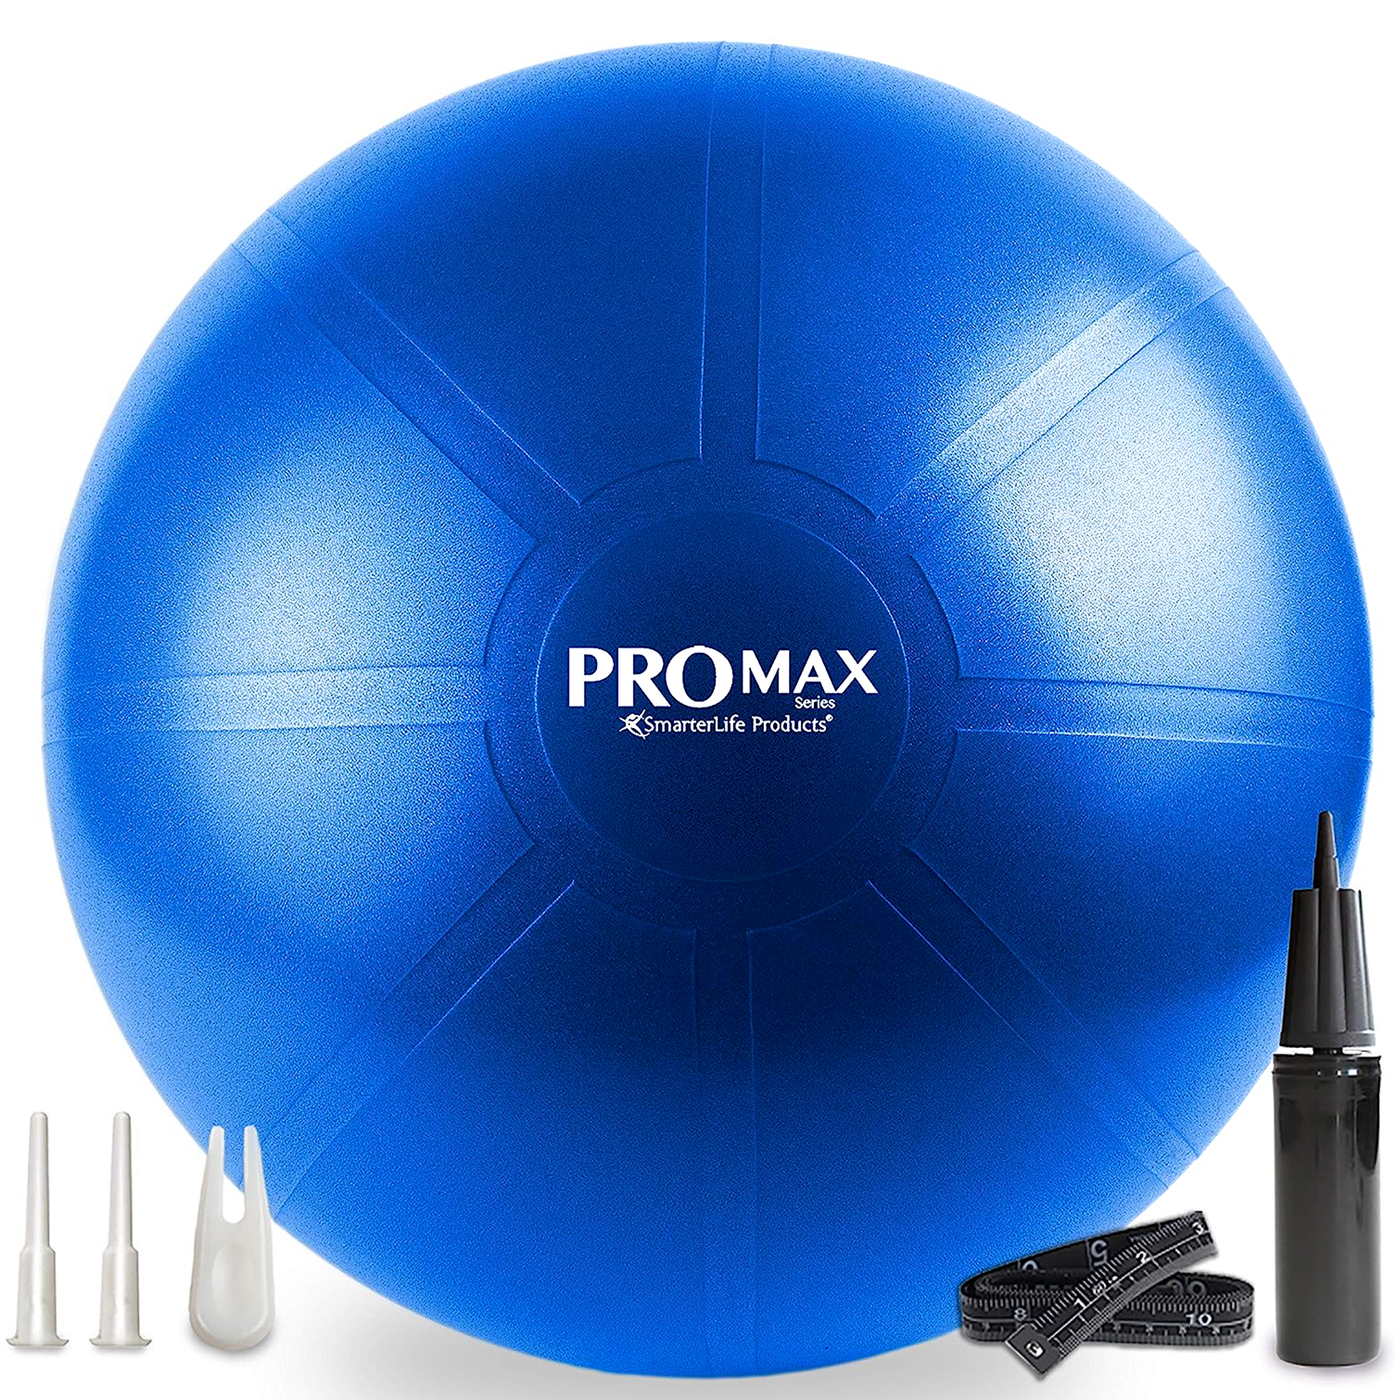 PRO MAX Series Exercise Ball by SmarterLife